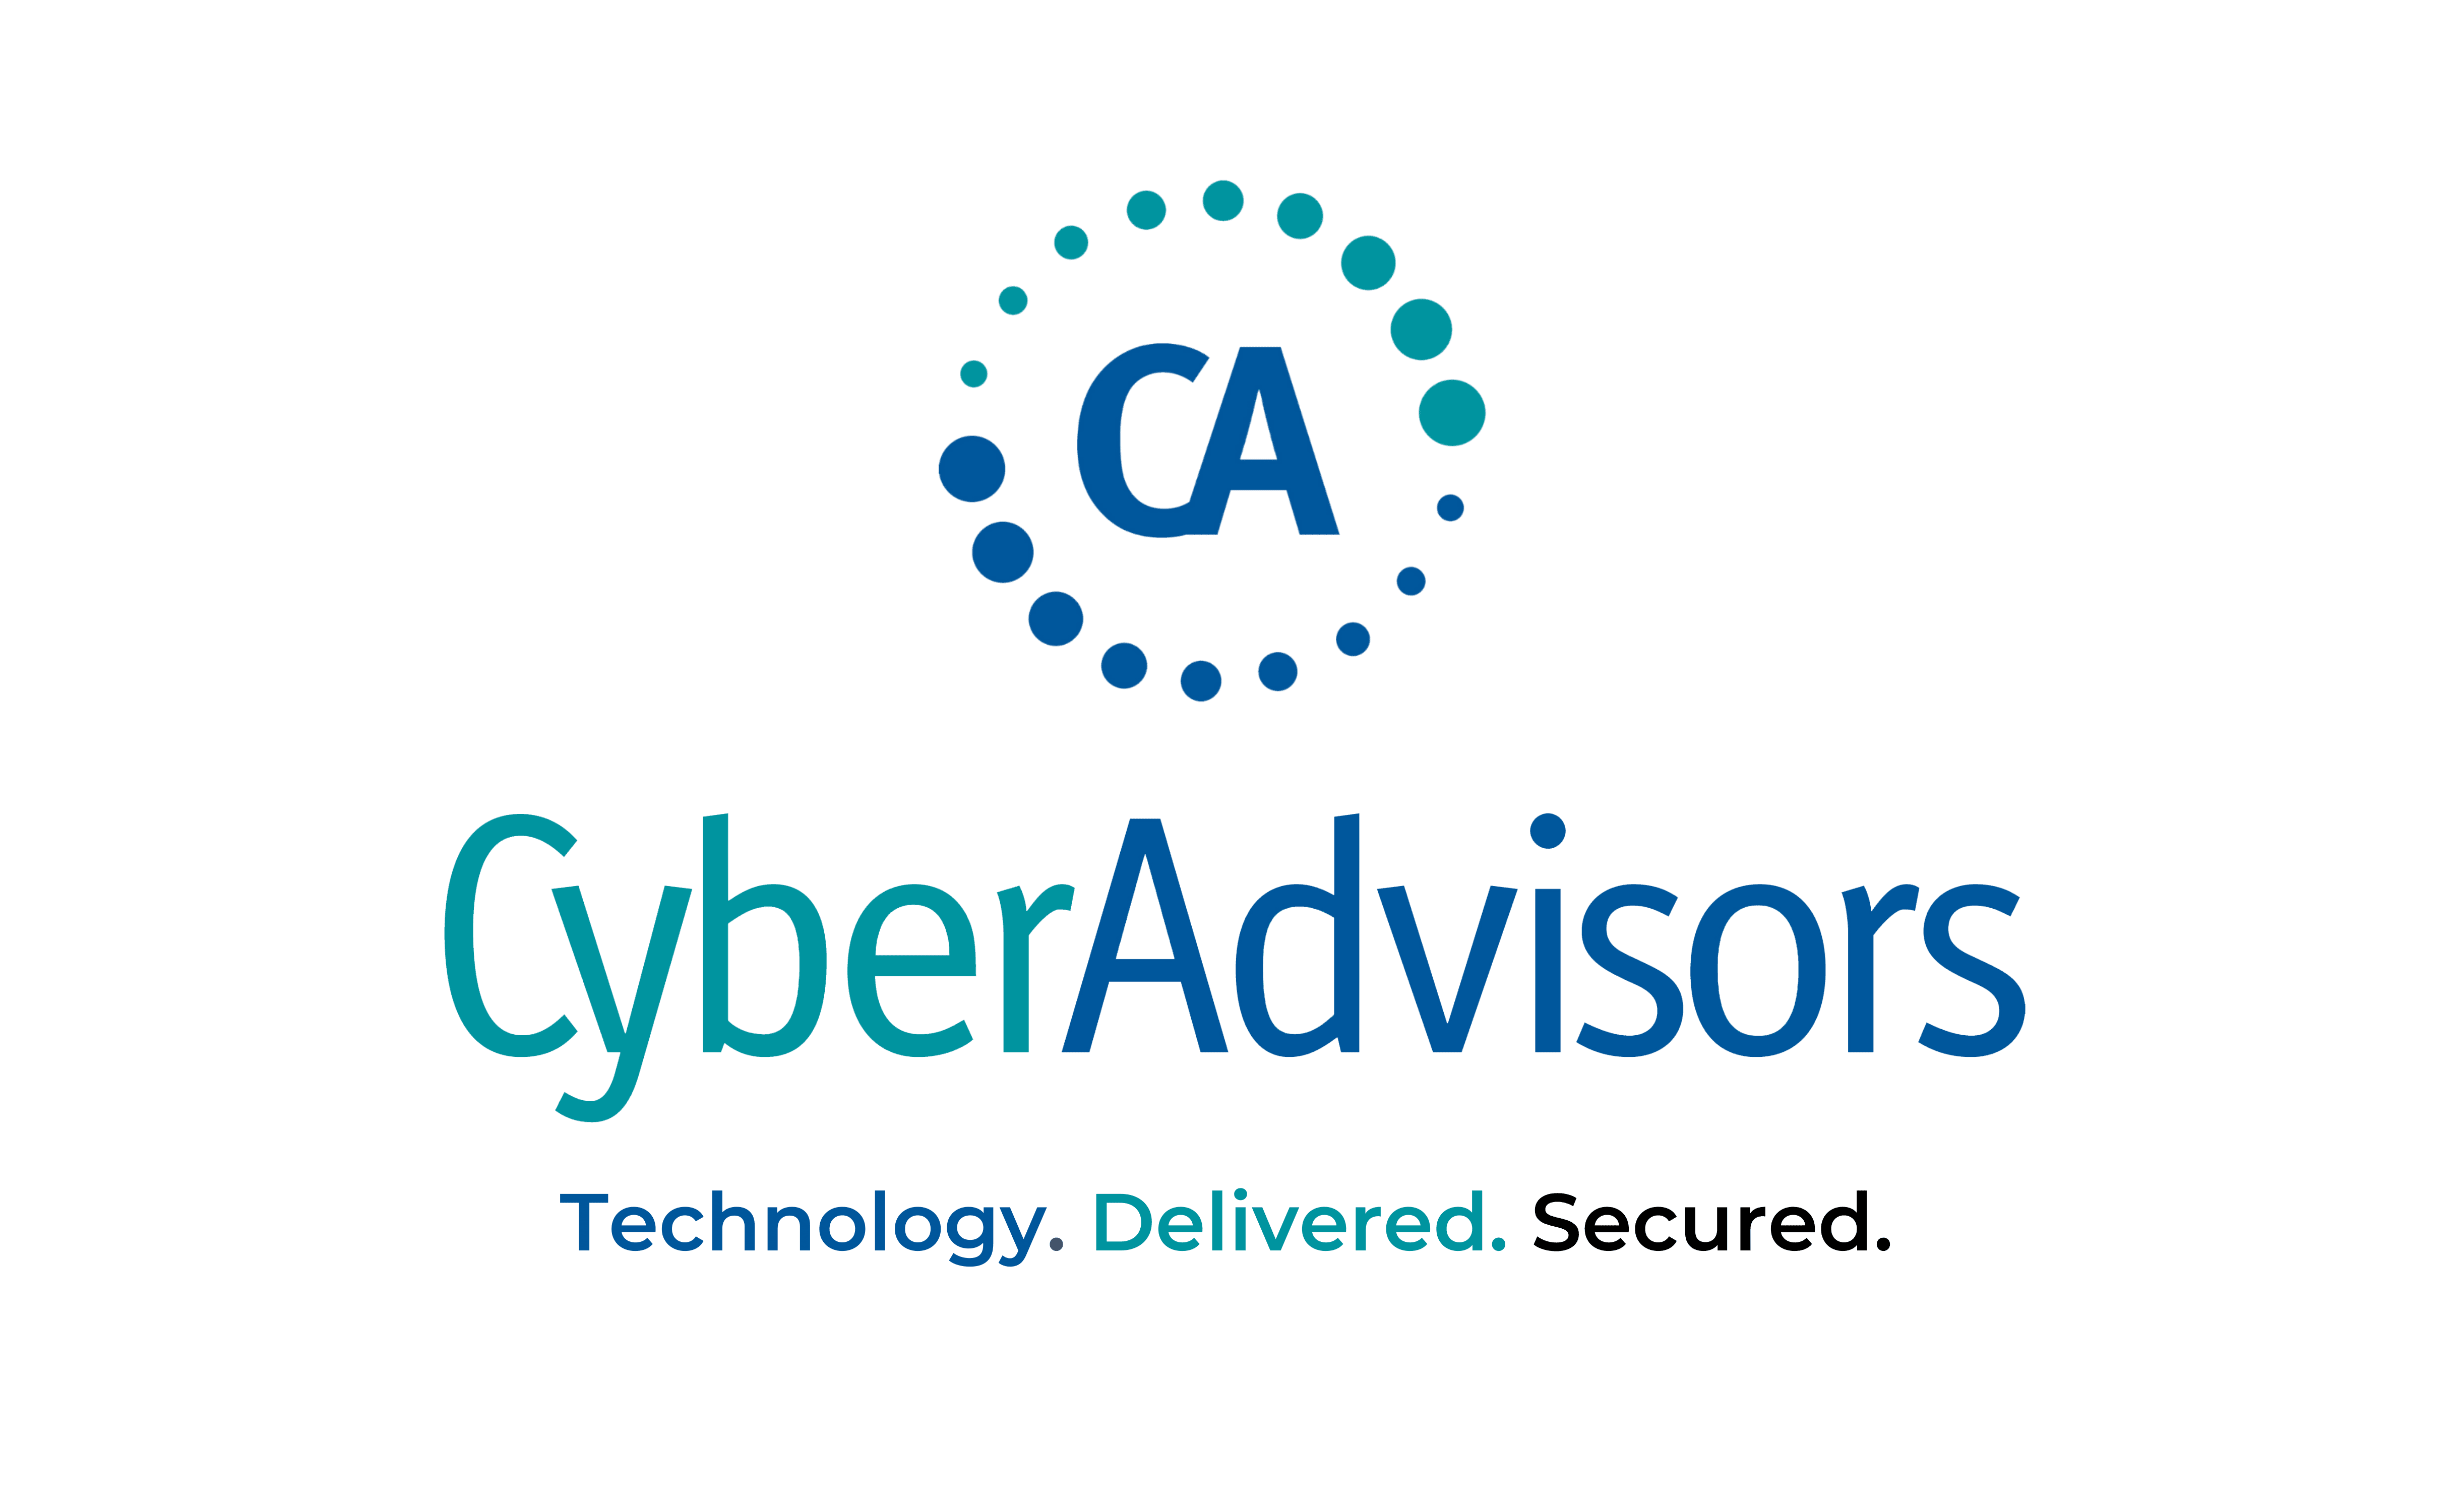 Press Release - Cyber Advisors Forges New Strategic Partnership.